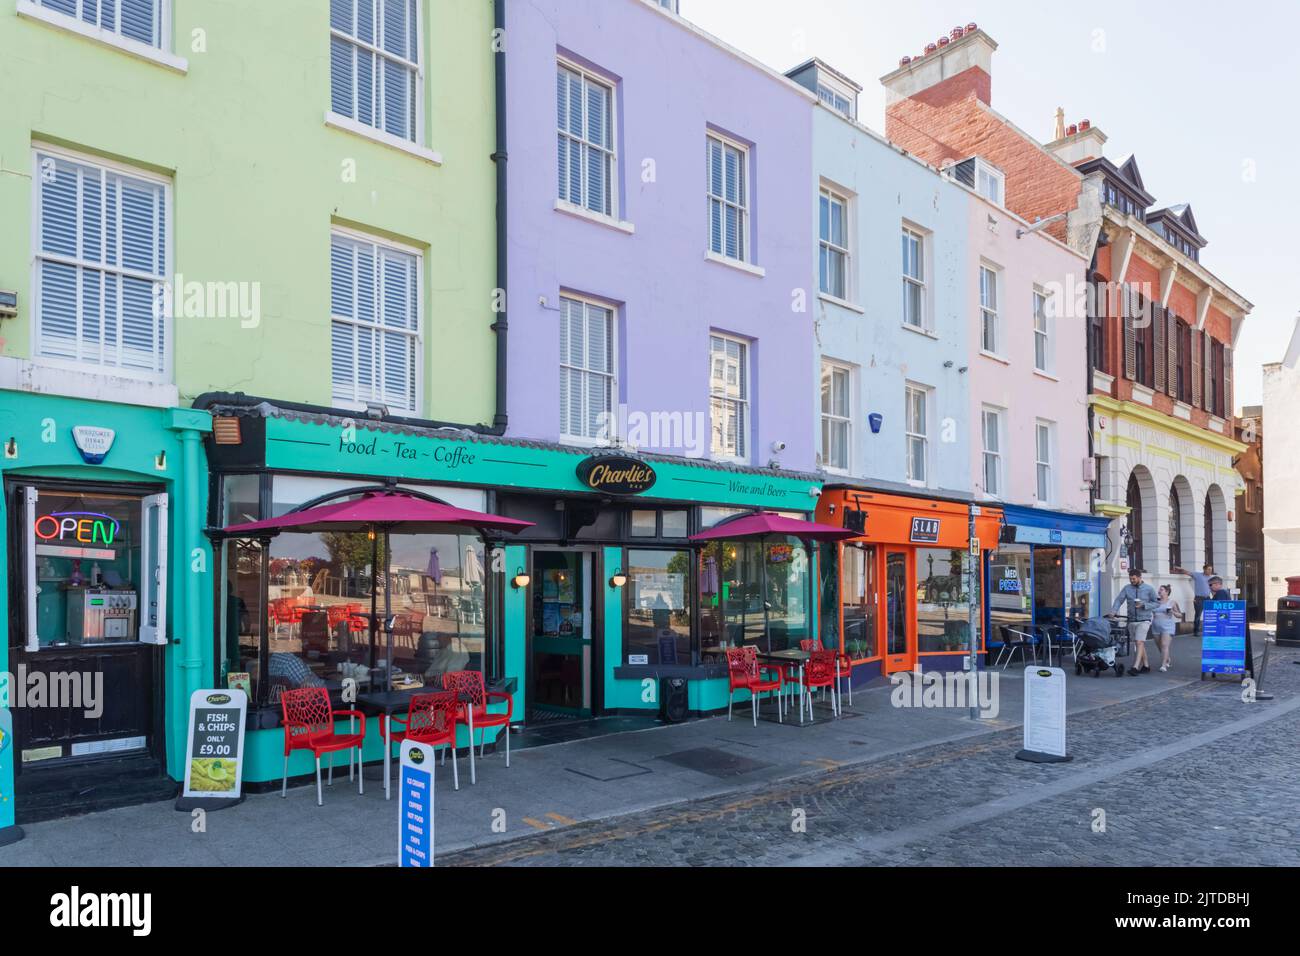 England, Kent, Margate, Old Town Colourful Seafront Cafes and Restaurants Stock Photo